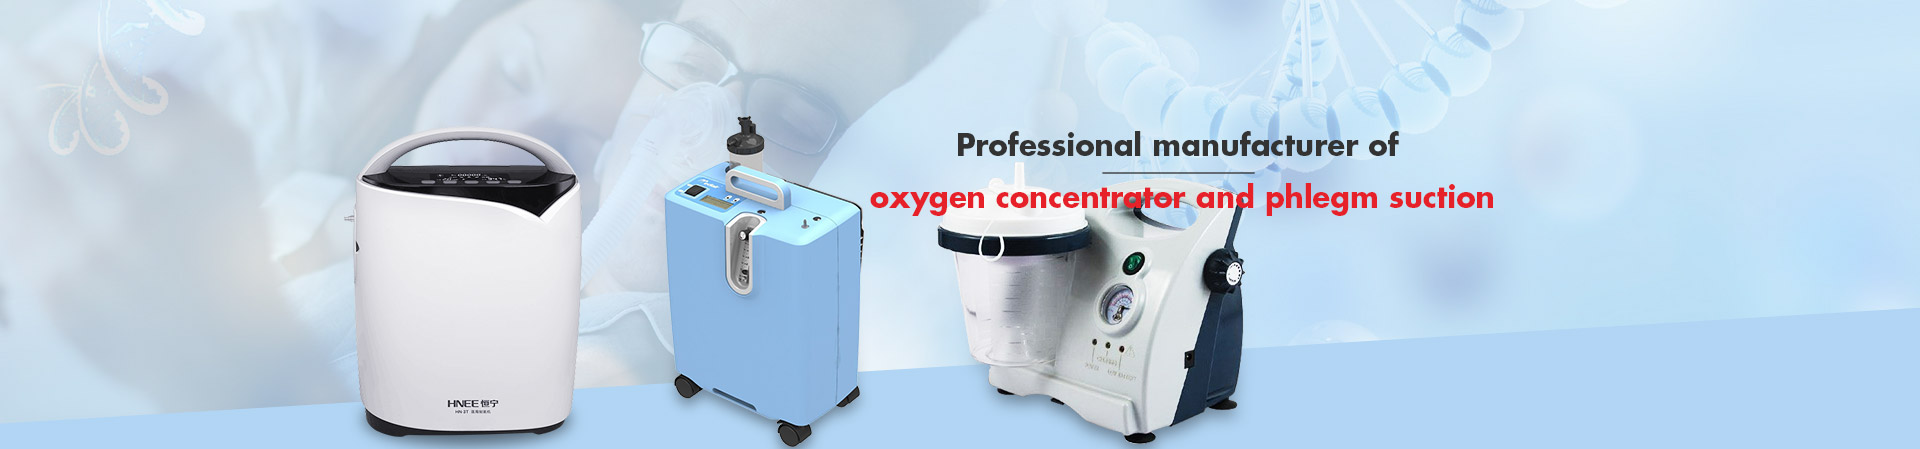 Oxygen Concentrator and Phlegm Suctiron System